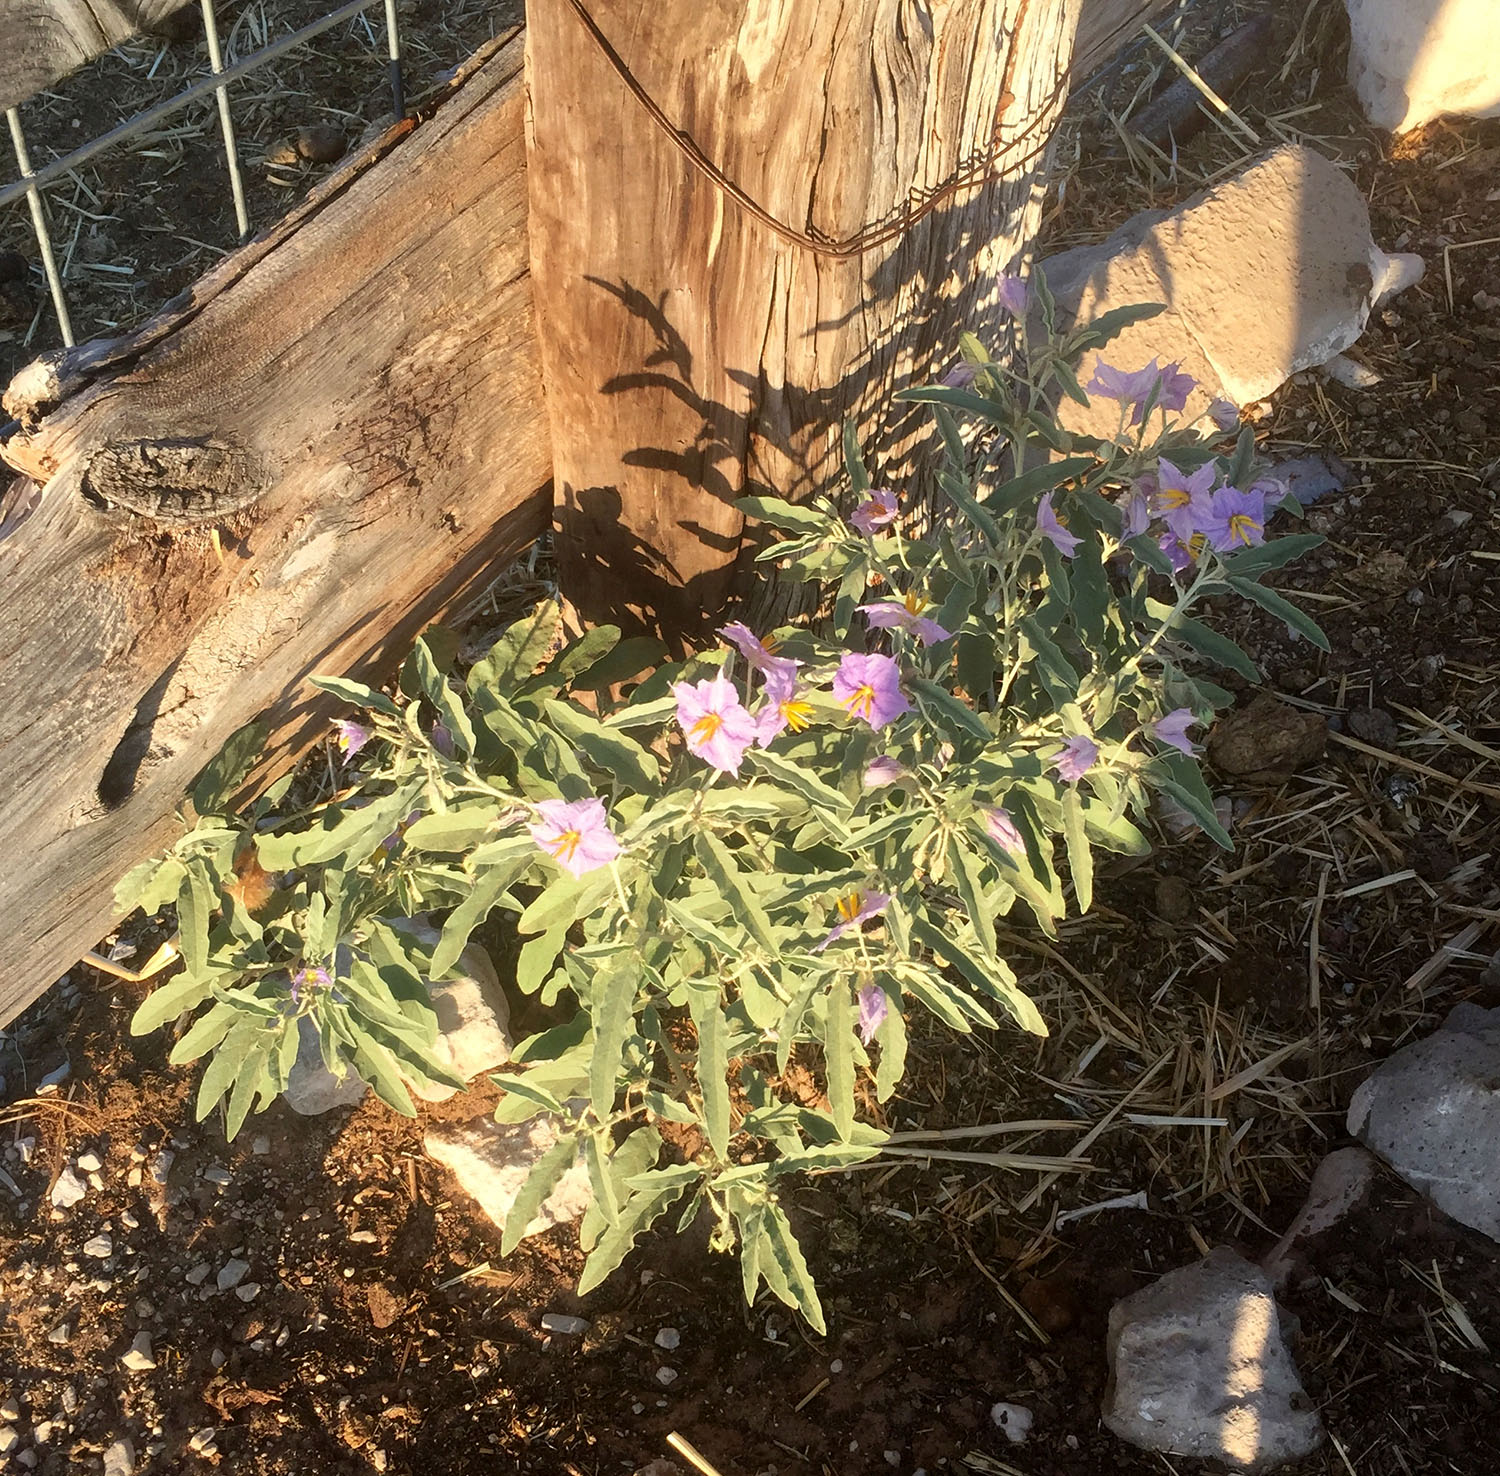 Plant growing at the base of a corral fence, with dusty gray/green foliage and a light purple flower.